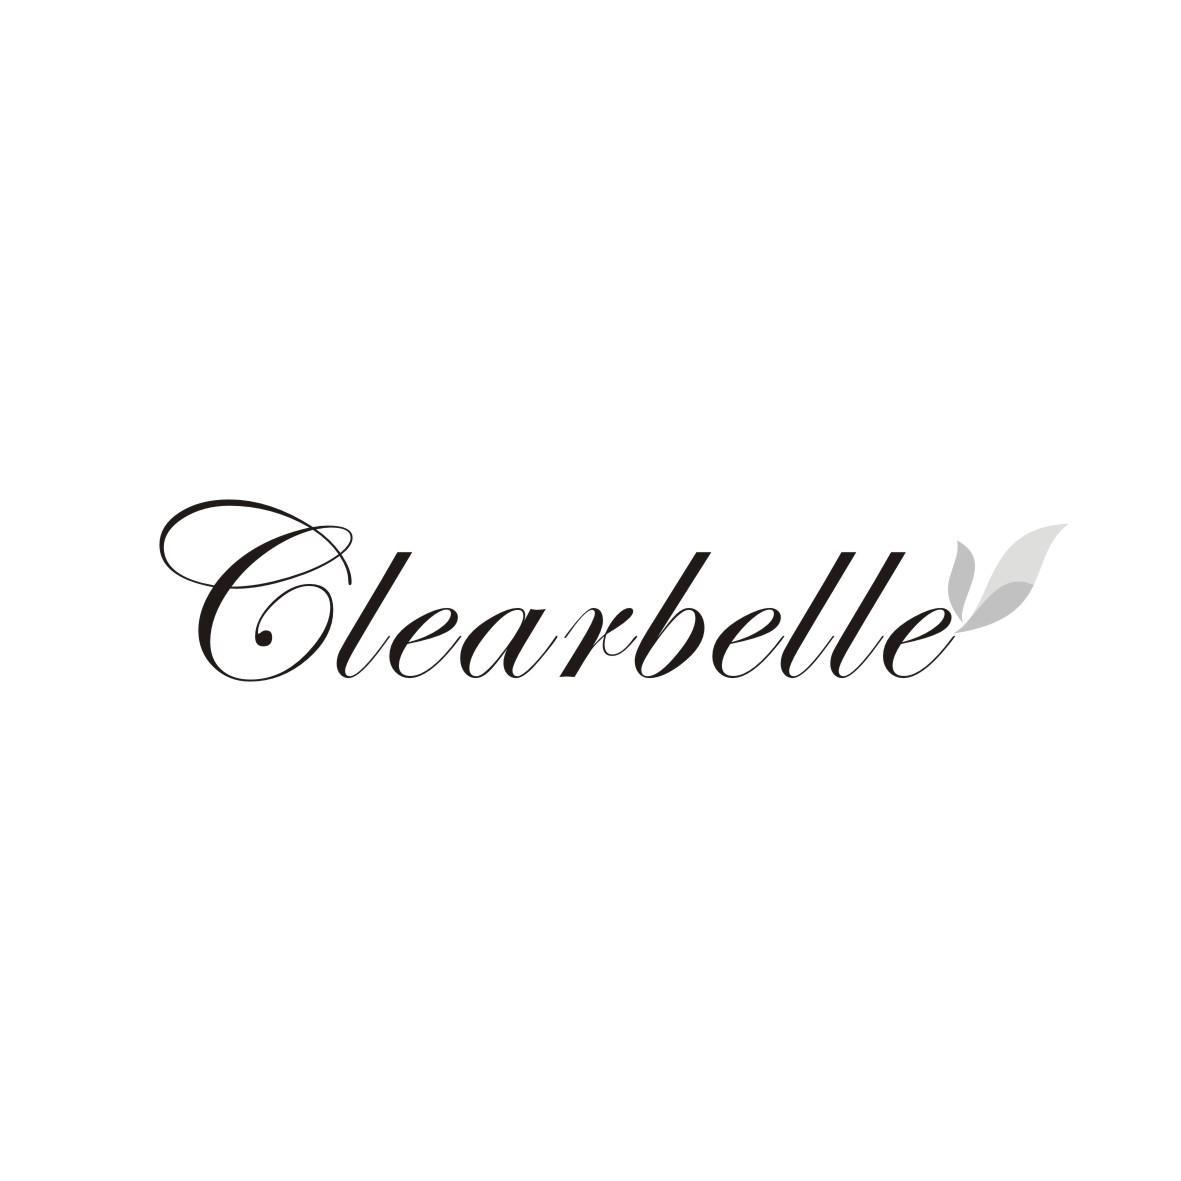 CLEARBELLE